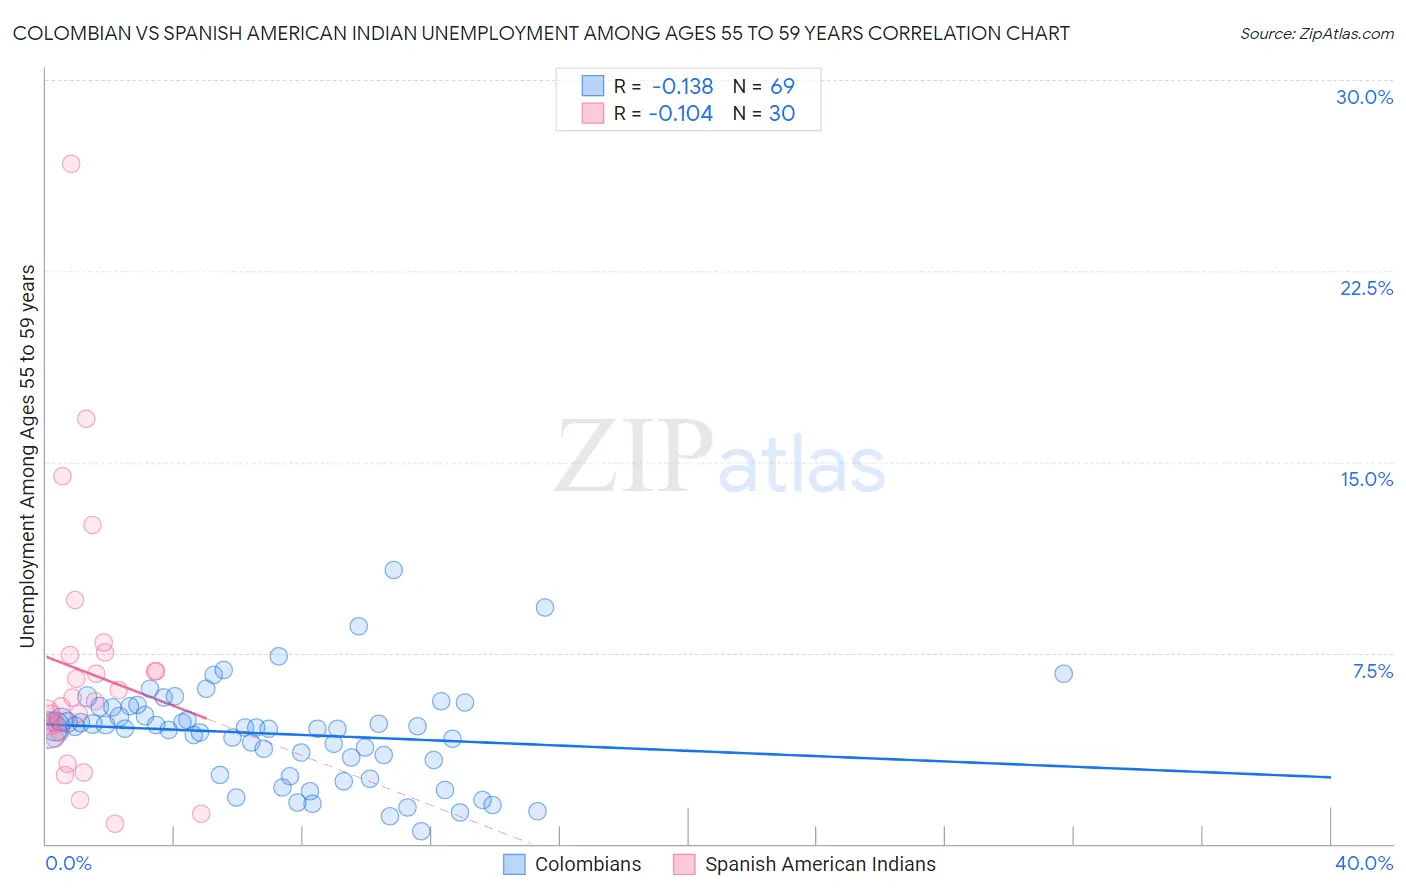 Colombian vs Spanish American Indian Unemployment Among Ages 55 to 59 years